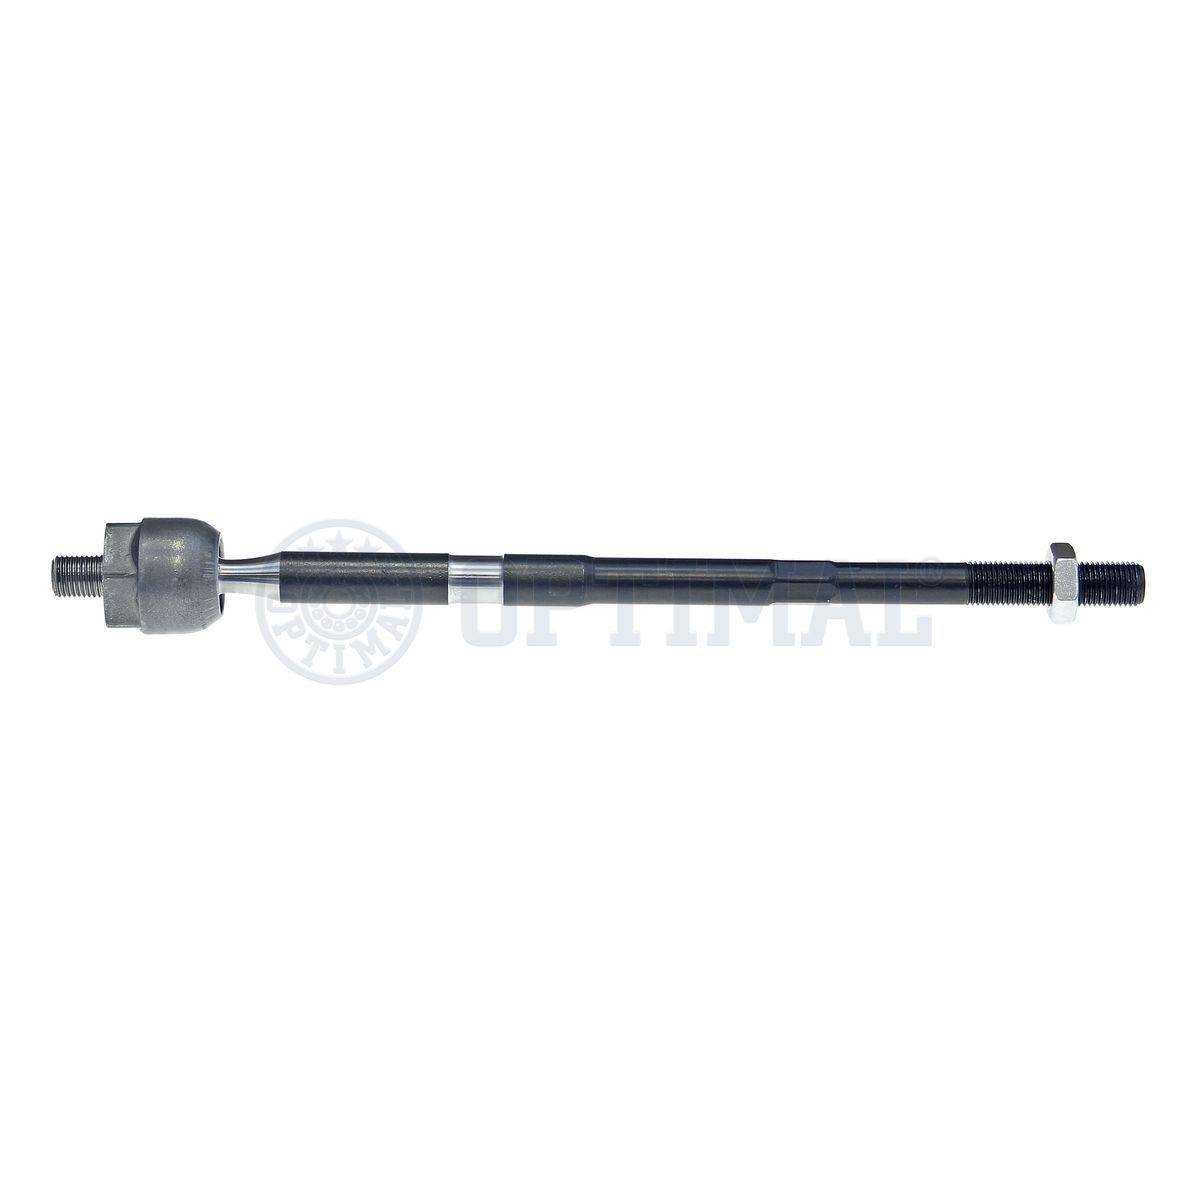 OPTIMAL Front Axle Left, Front Axle Right, M14 x 1,50 RHT M, 311 mm Length: 311mm Tie rod axle joint G2-1232 buy